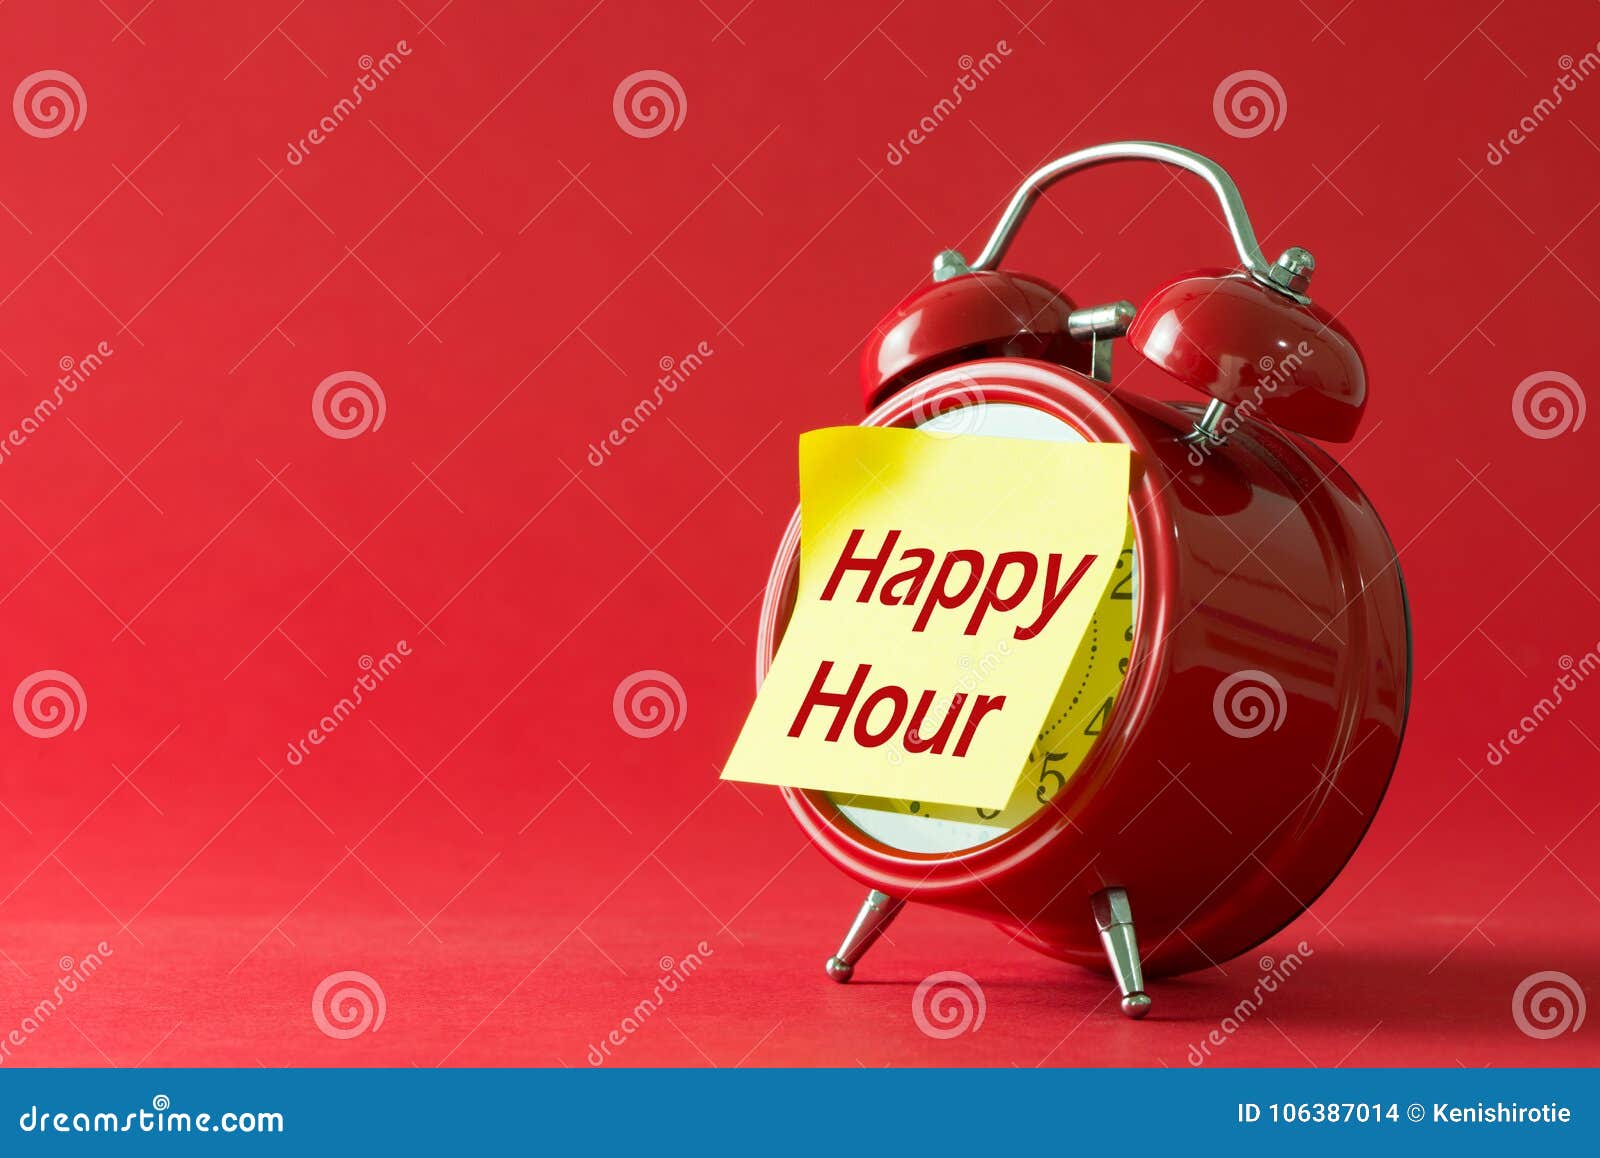 happy hour with classic clock